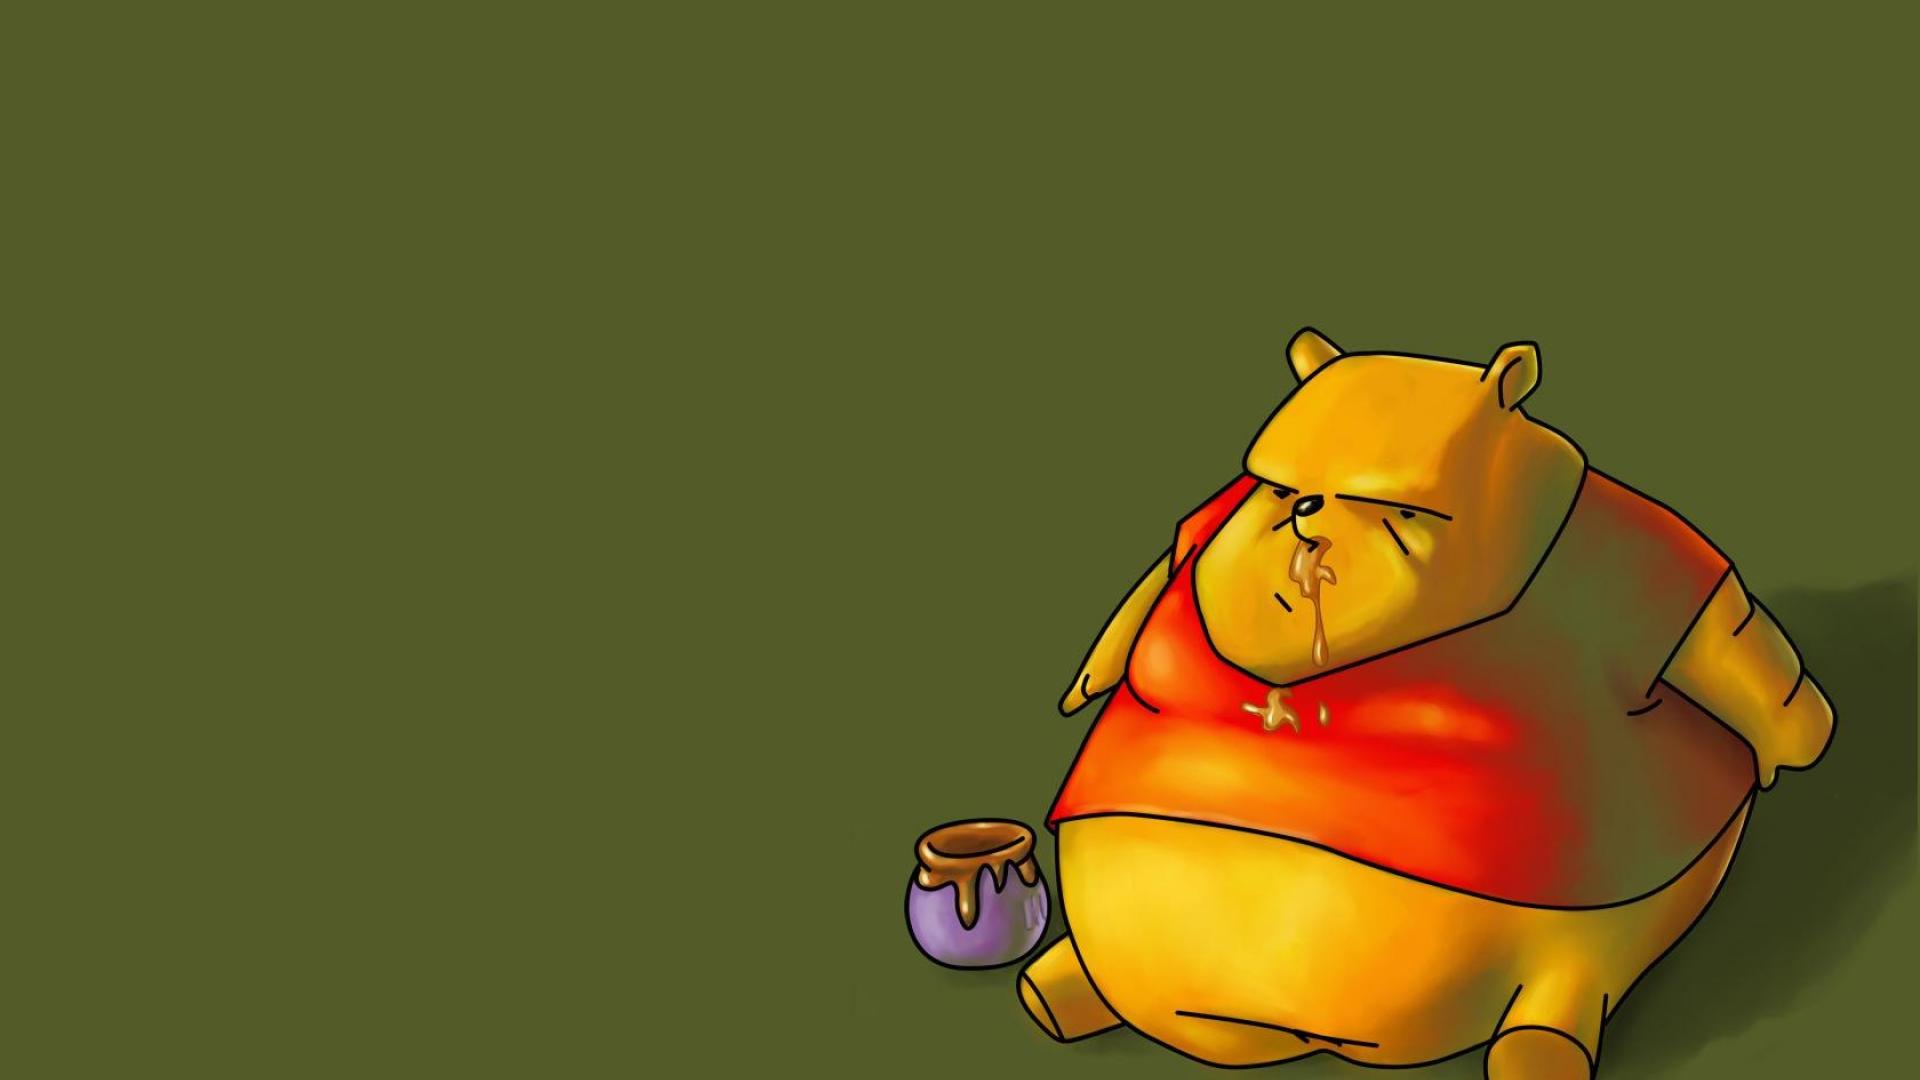 fat vinnie the pooh whinny funny humor art HD Wallpaper wallpaper ...